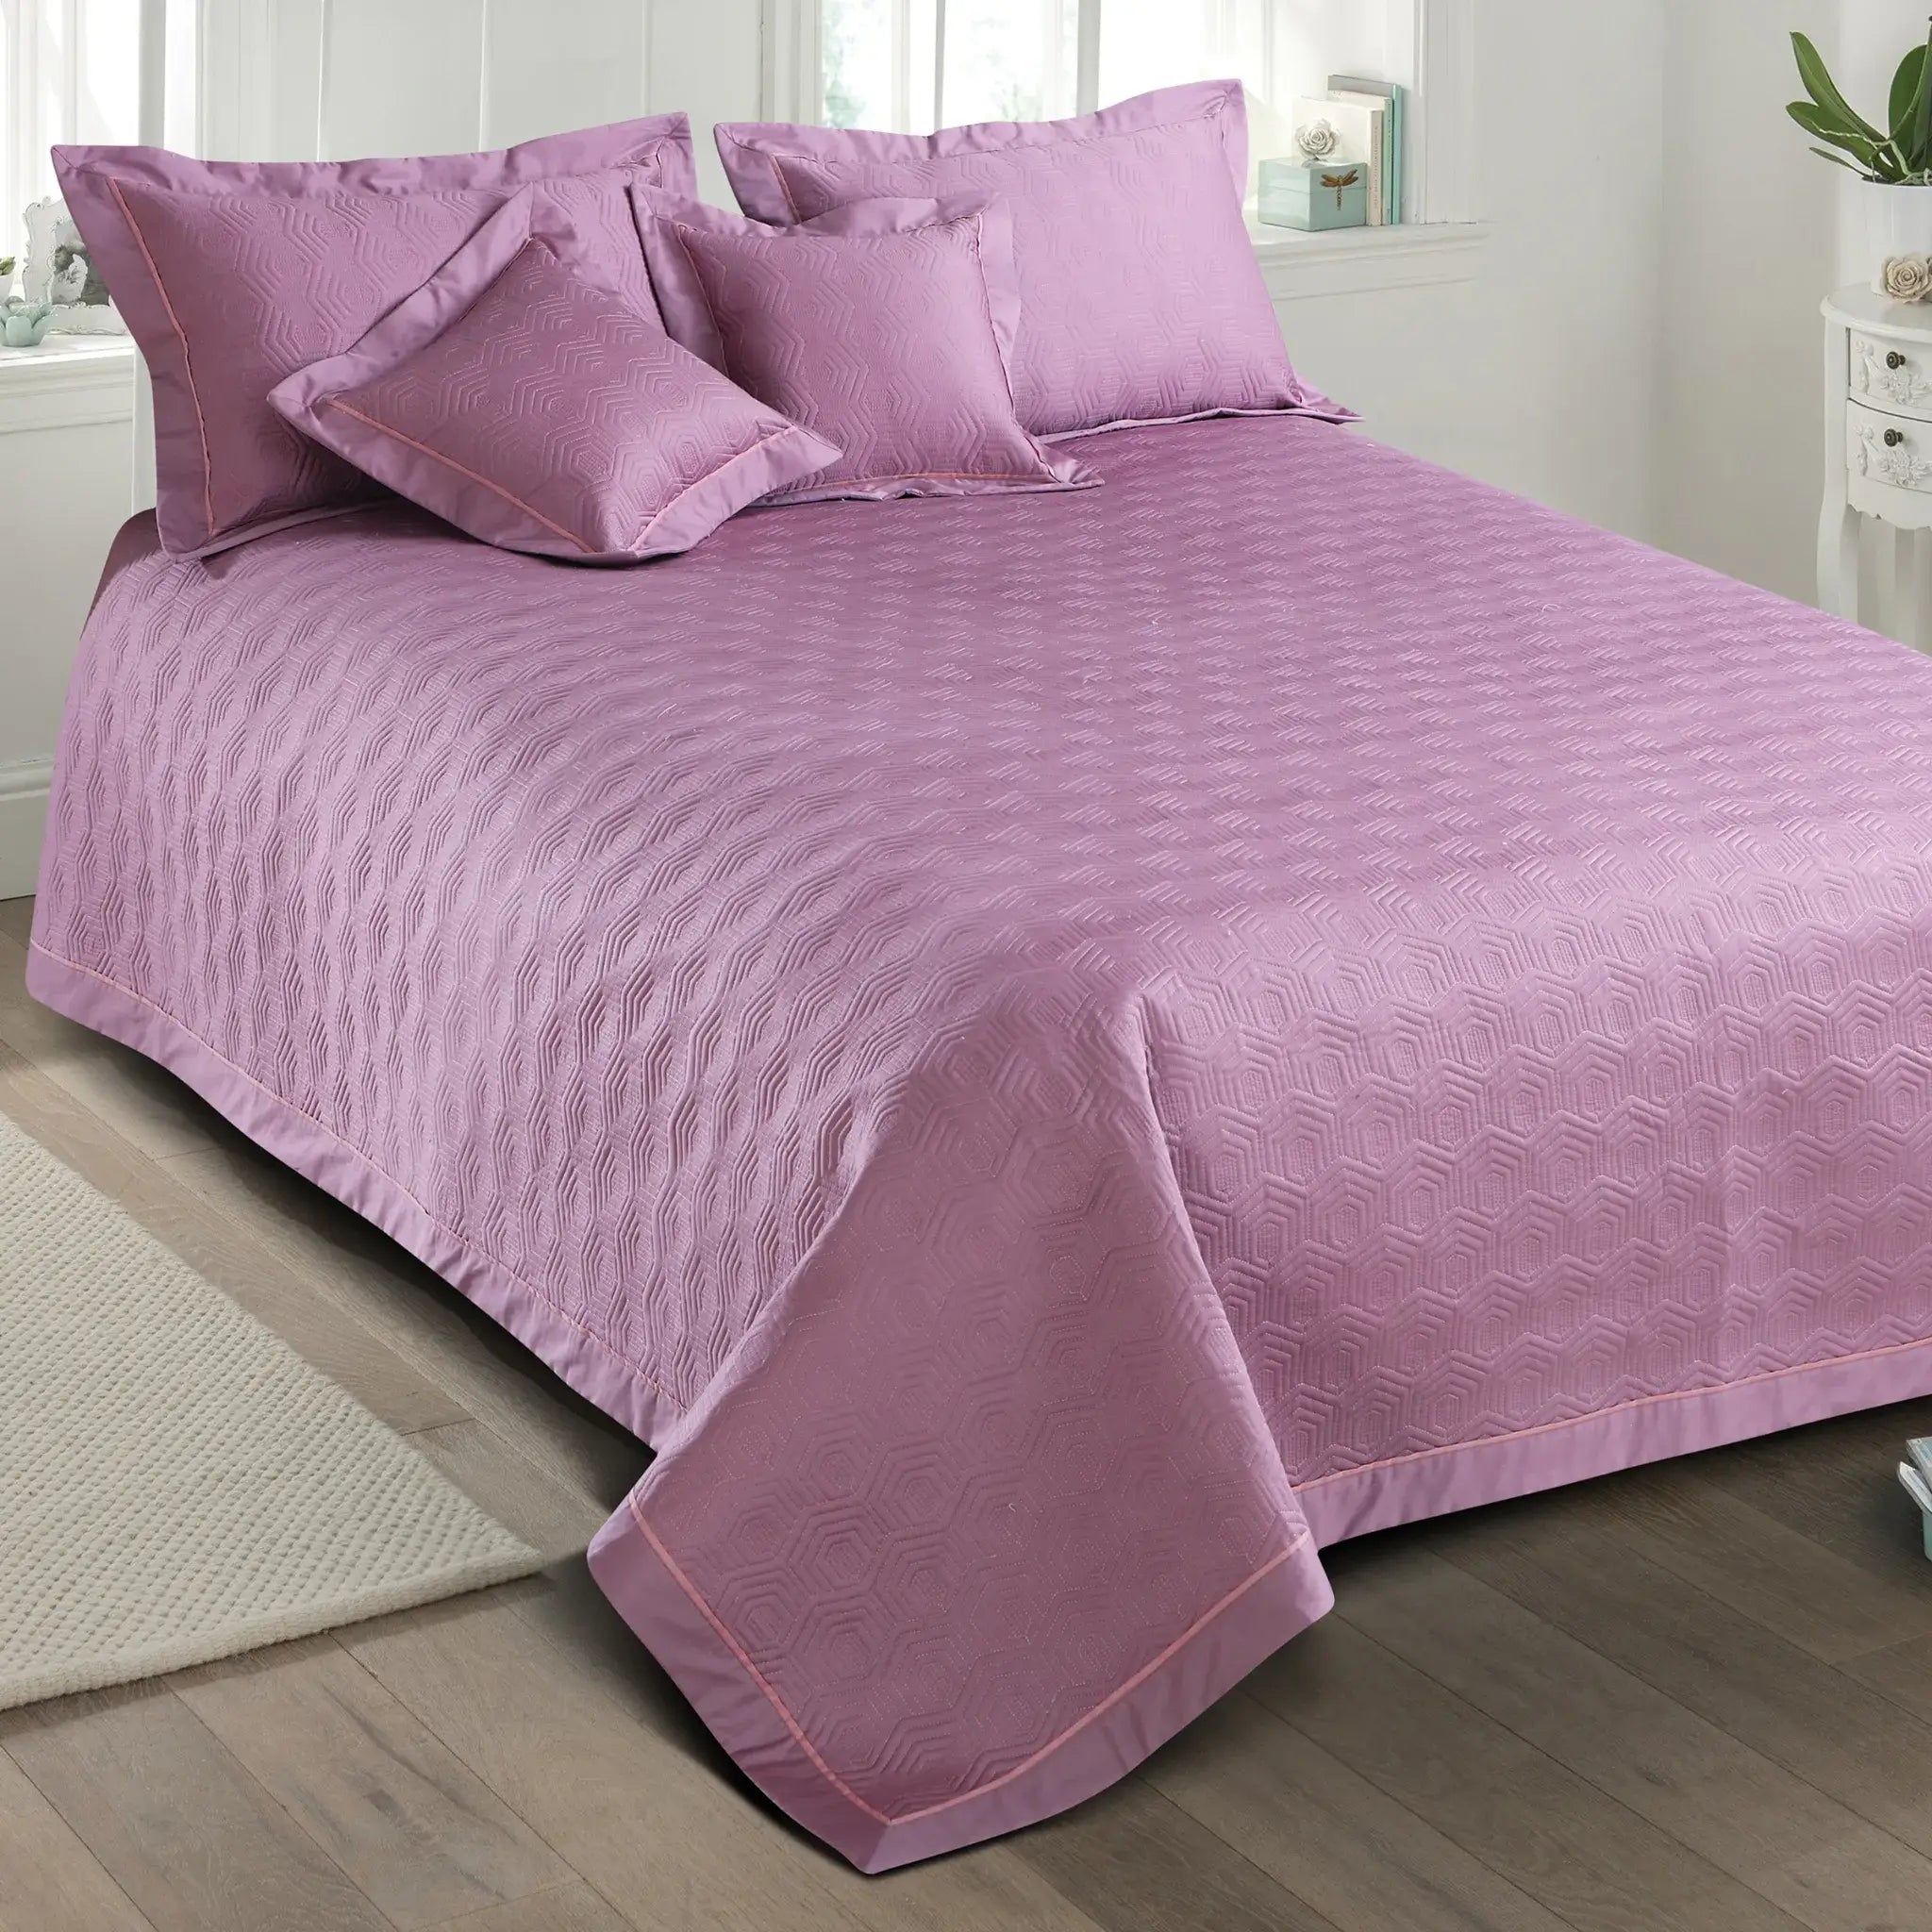 mauve-king-size-bed-cover